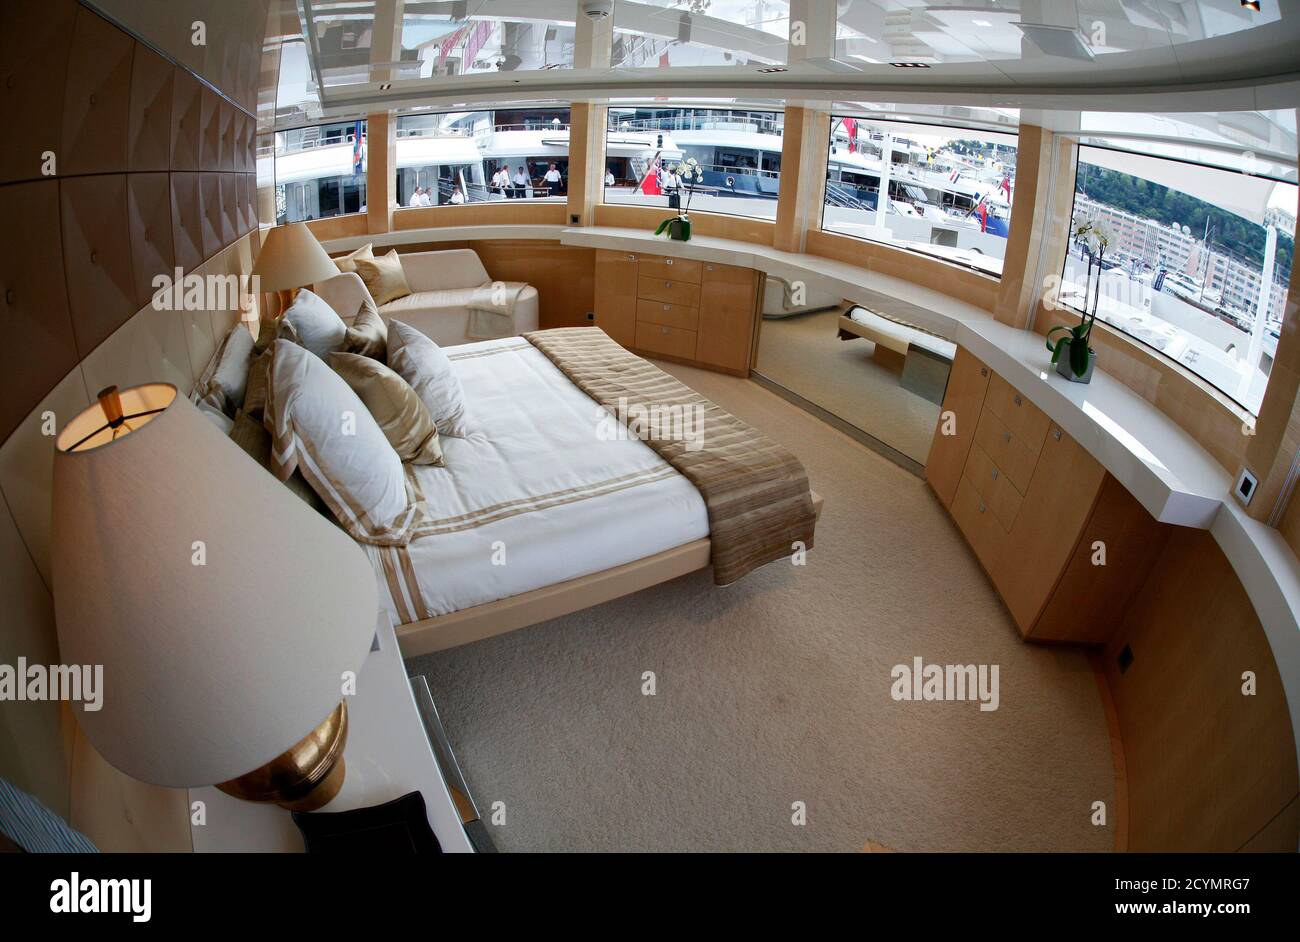 The master bedroom aboard "La Pellegrina", a 50 meters super yacht made in  France by Couach shipyard, is seen during the 22nd Monaco Yacht show in  Monaco September 19, 2012. The Monaco